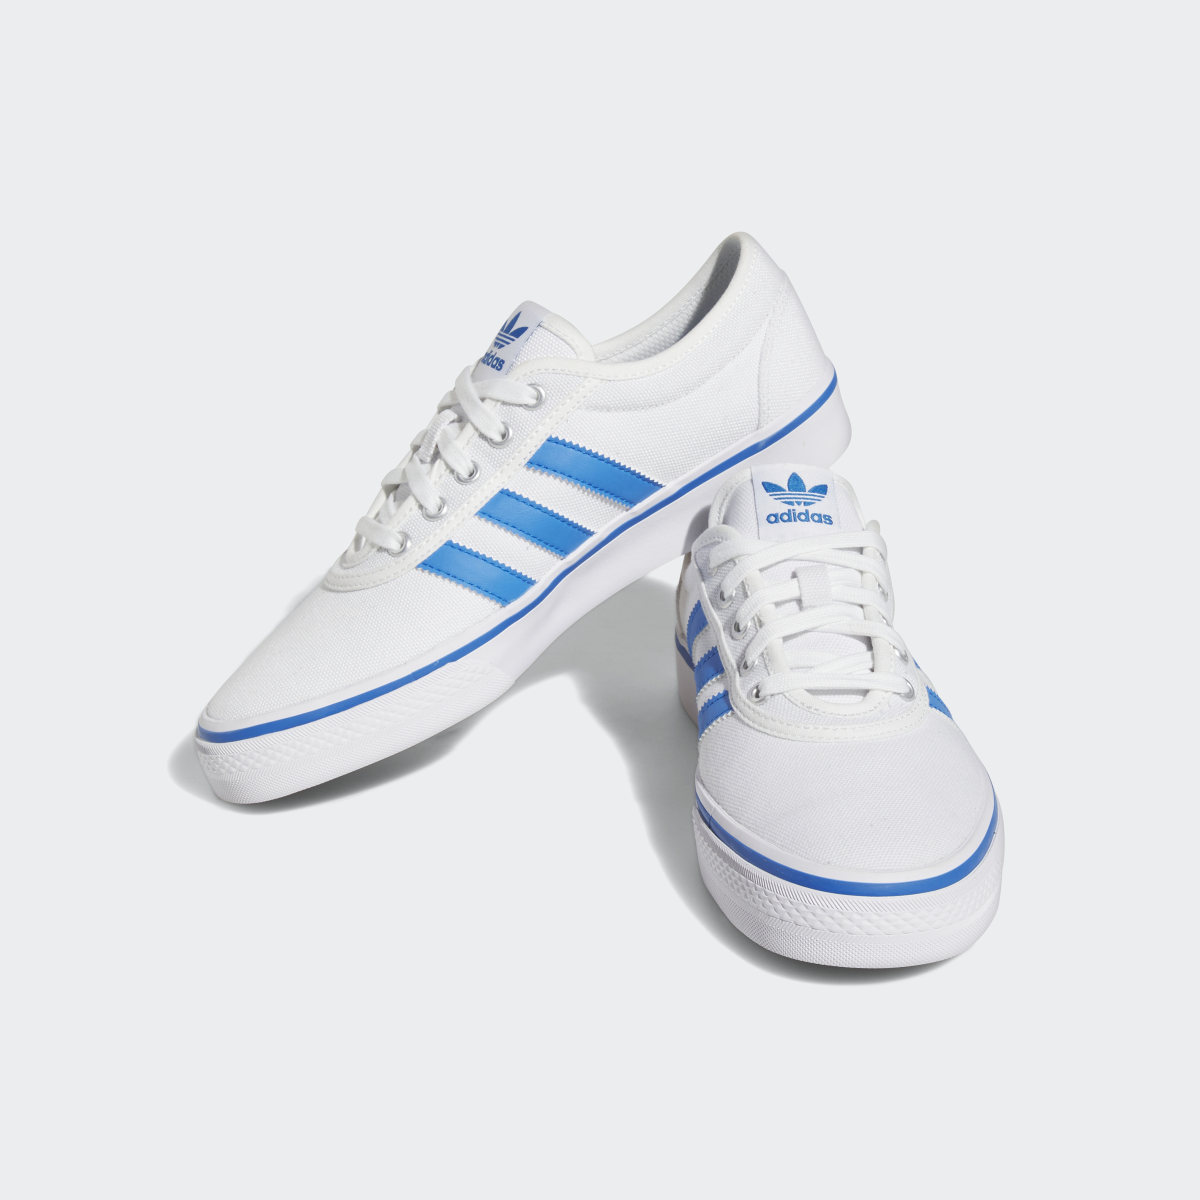 Adidas Adiease Shoes. 5